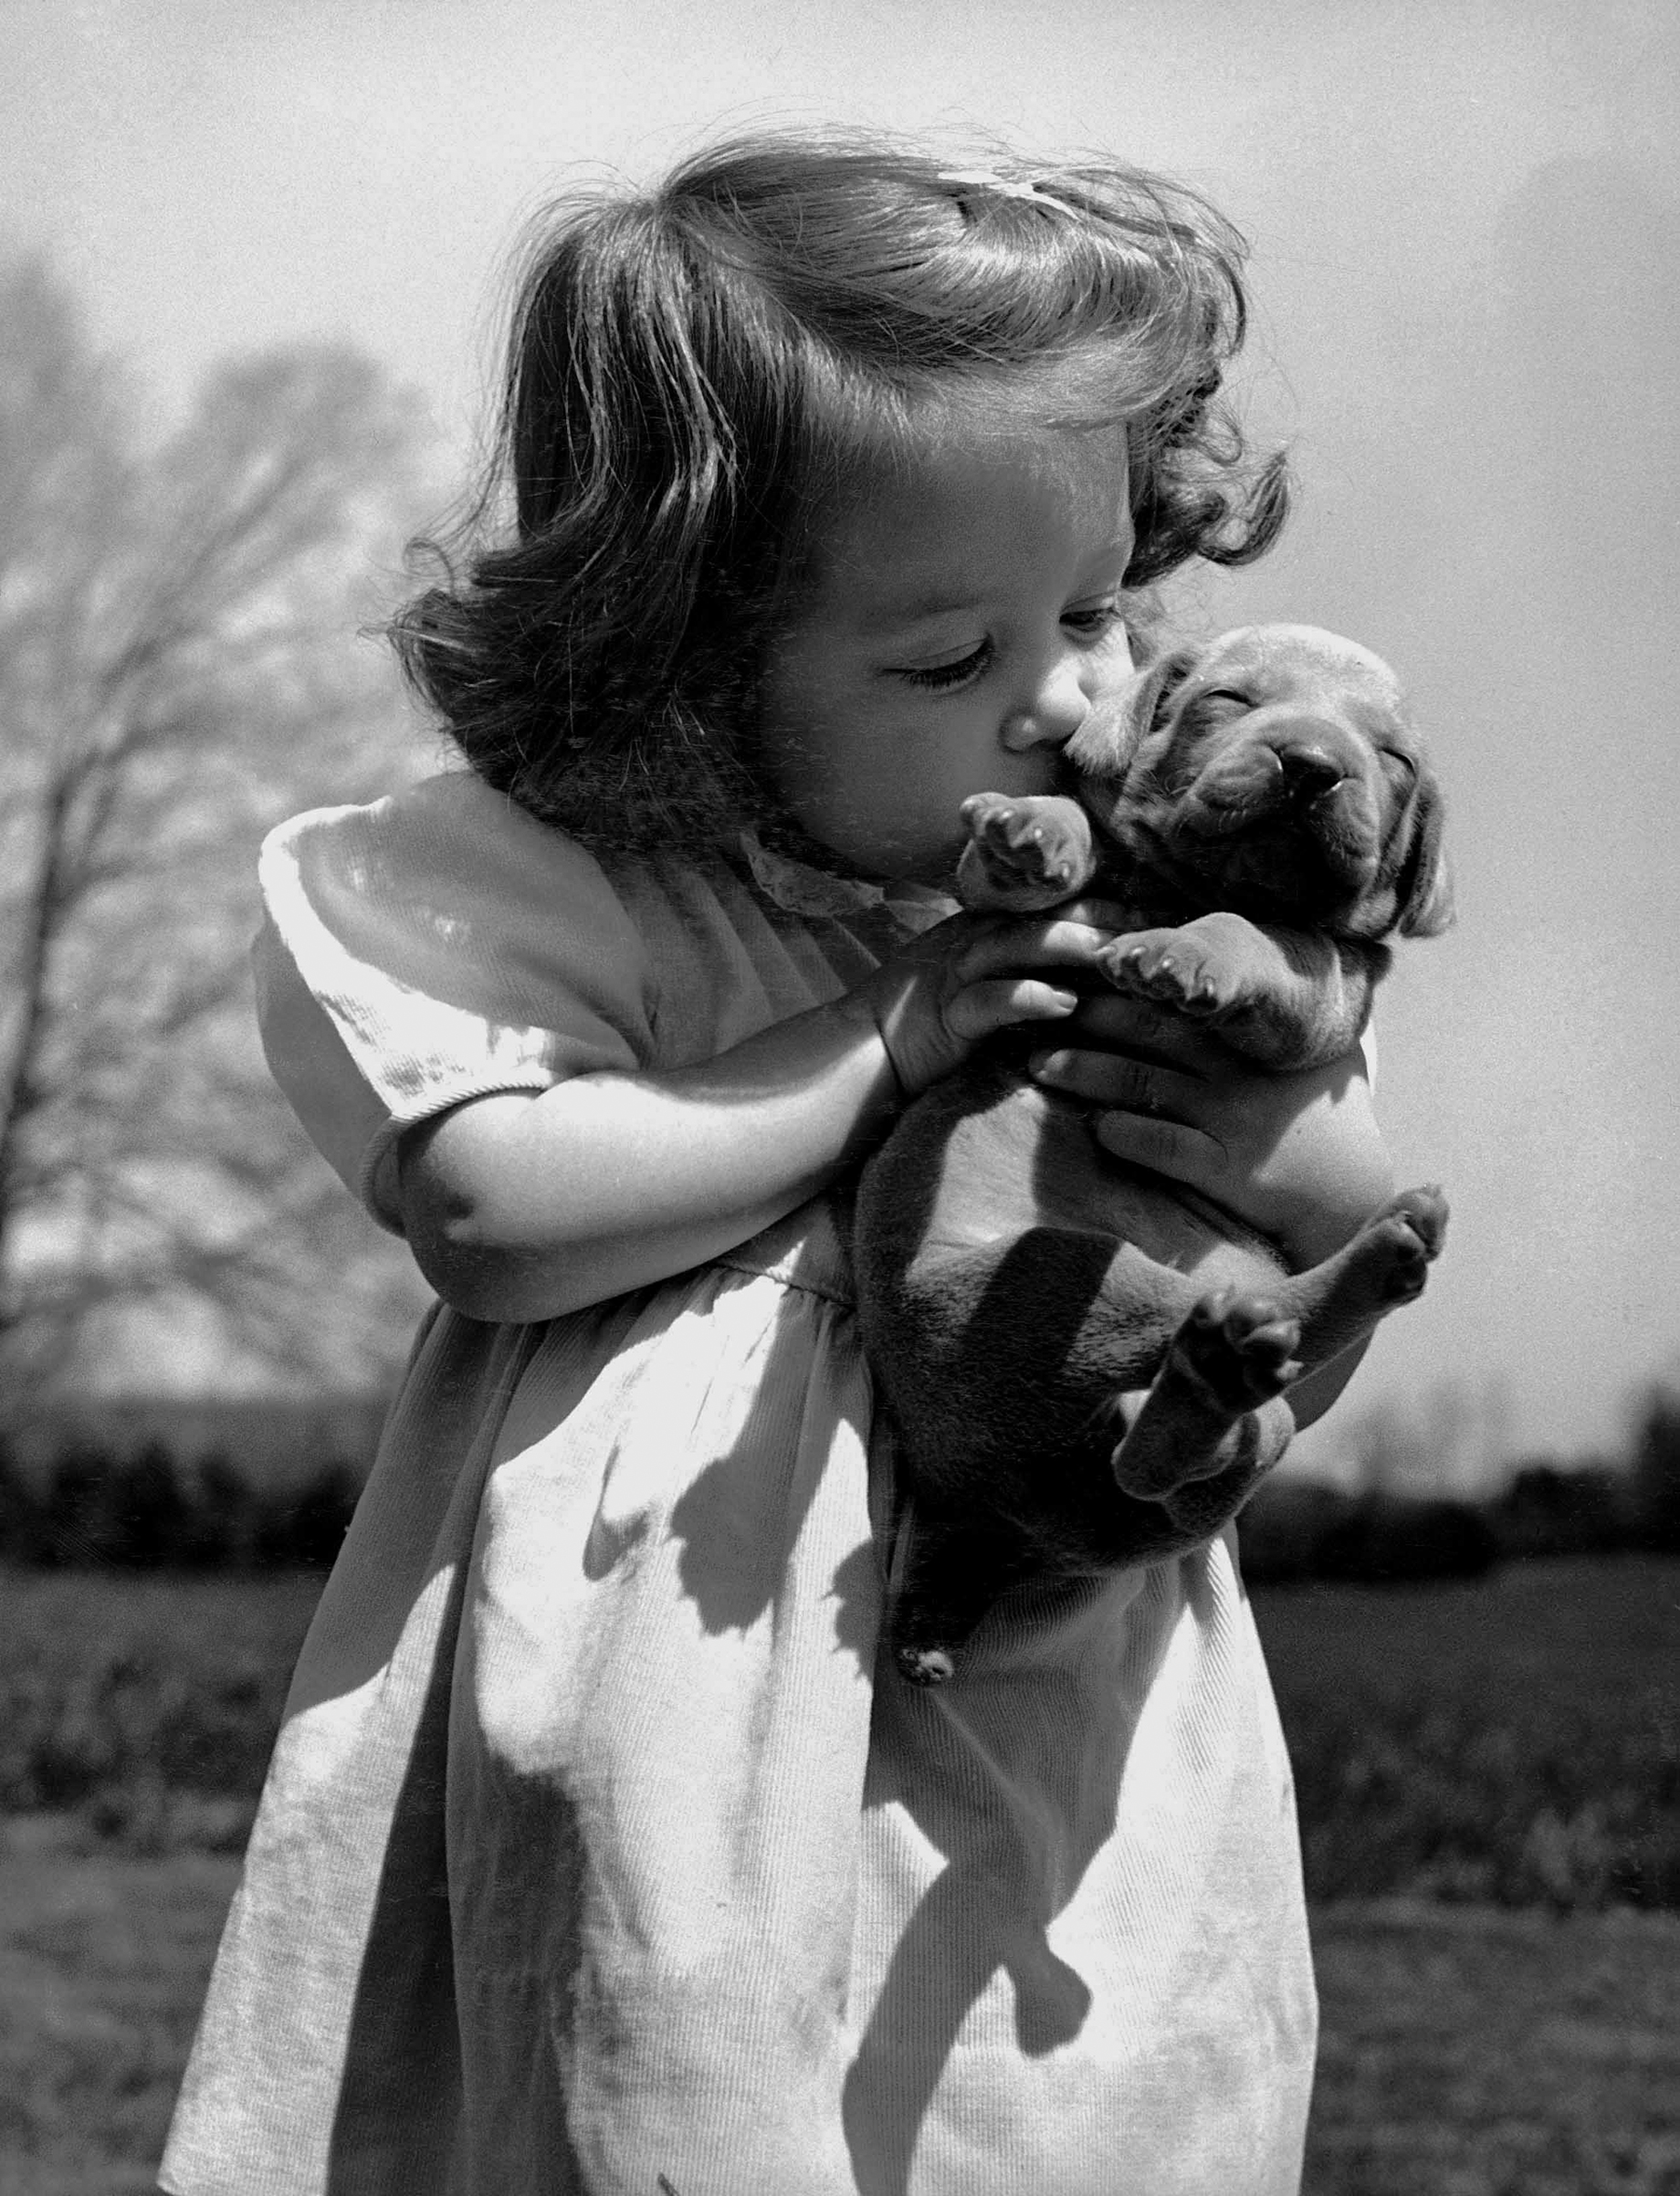 Christina Goldsmith tenderly kissing a Weimaraner puppy, which she took from a new litter of her father's stock since he is a top breeder of Weimaraner hunting dogs. 1950.